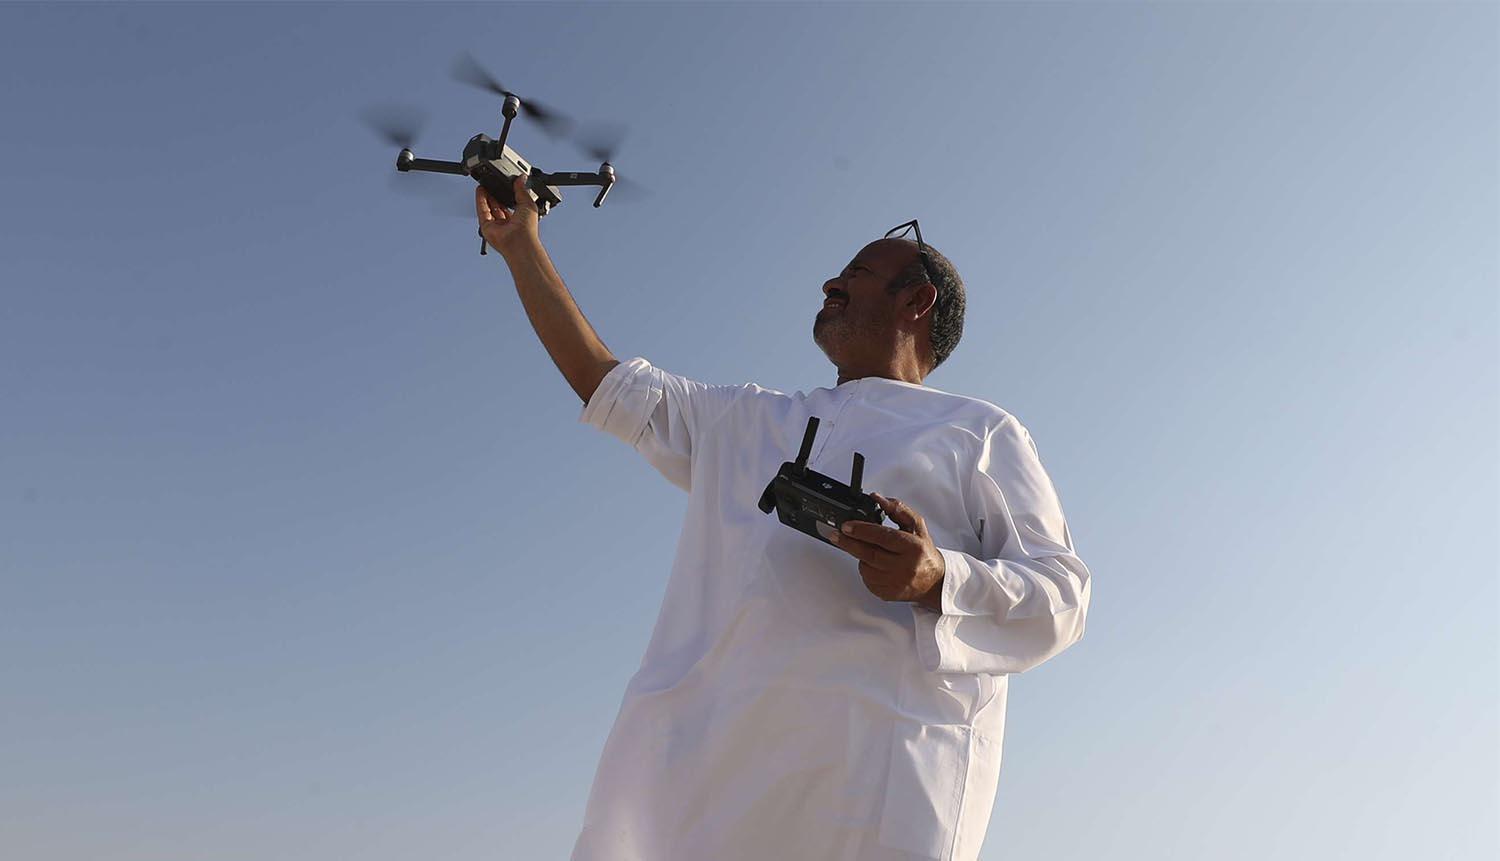 Exceptions might be granted by the permit authorities for businesses using drones for filming